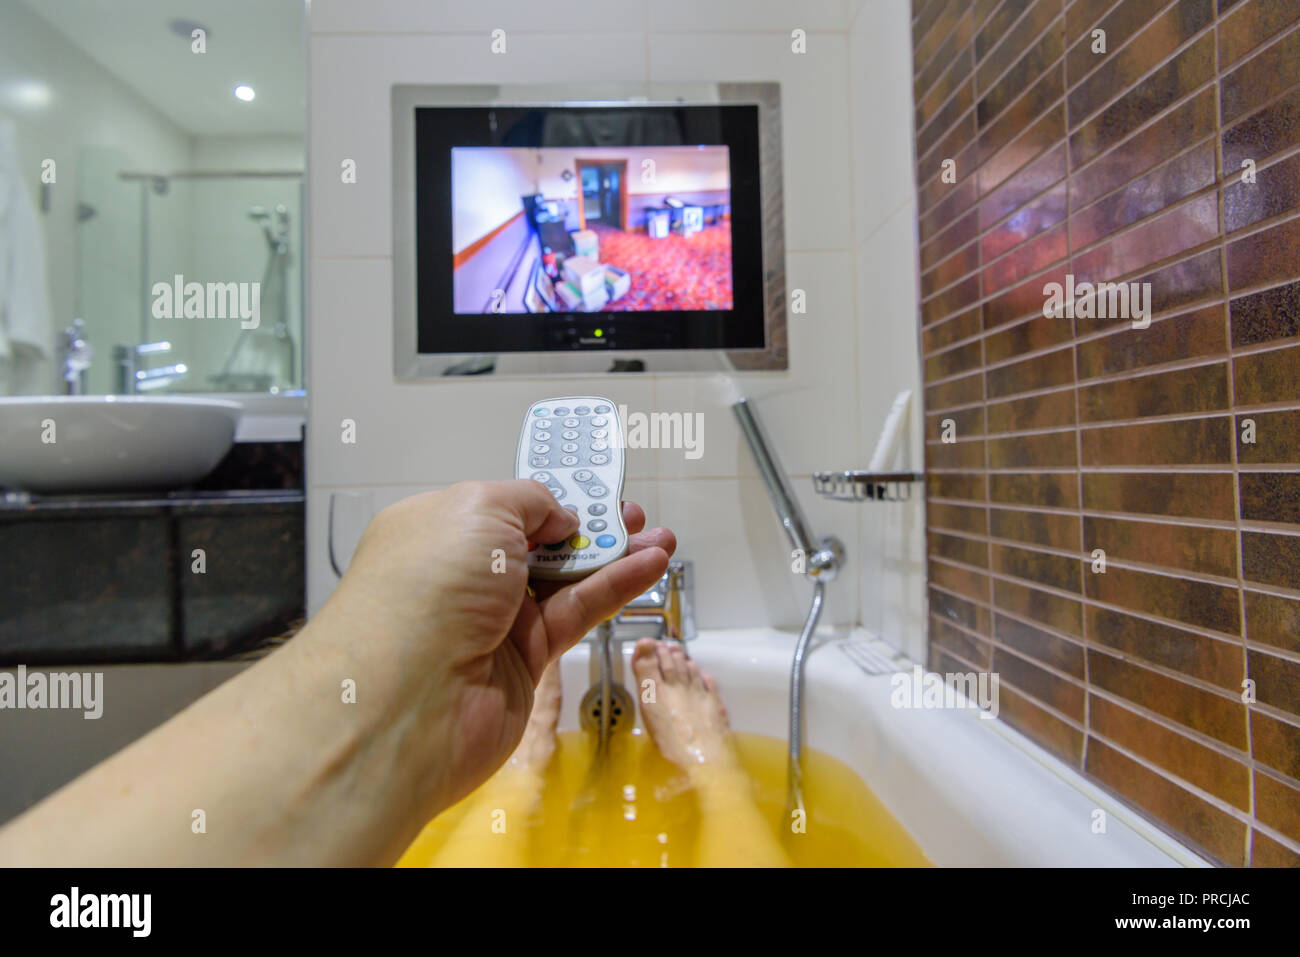 A man uses a remote control for a wall-mounted television as he takes a bath. Stock Photo